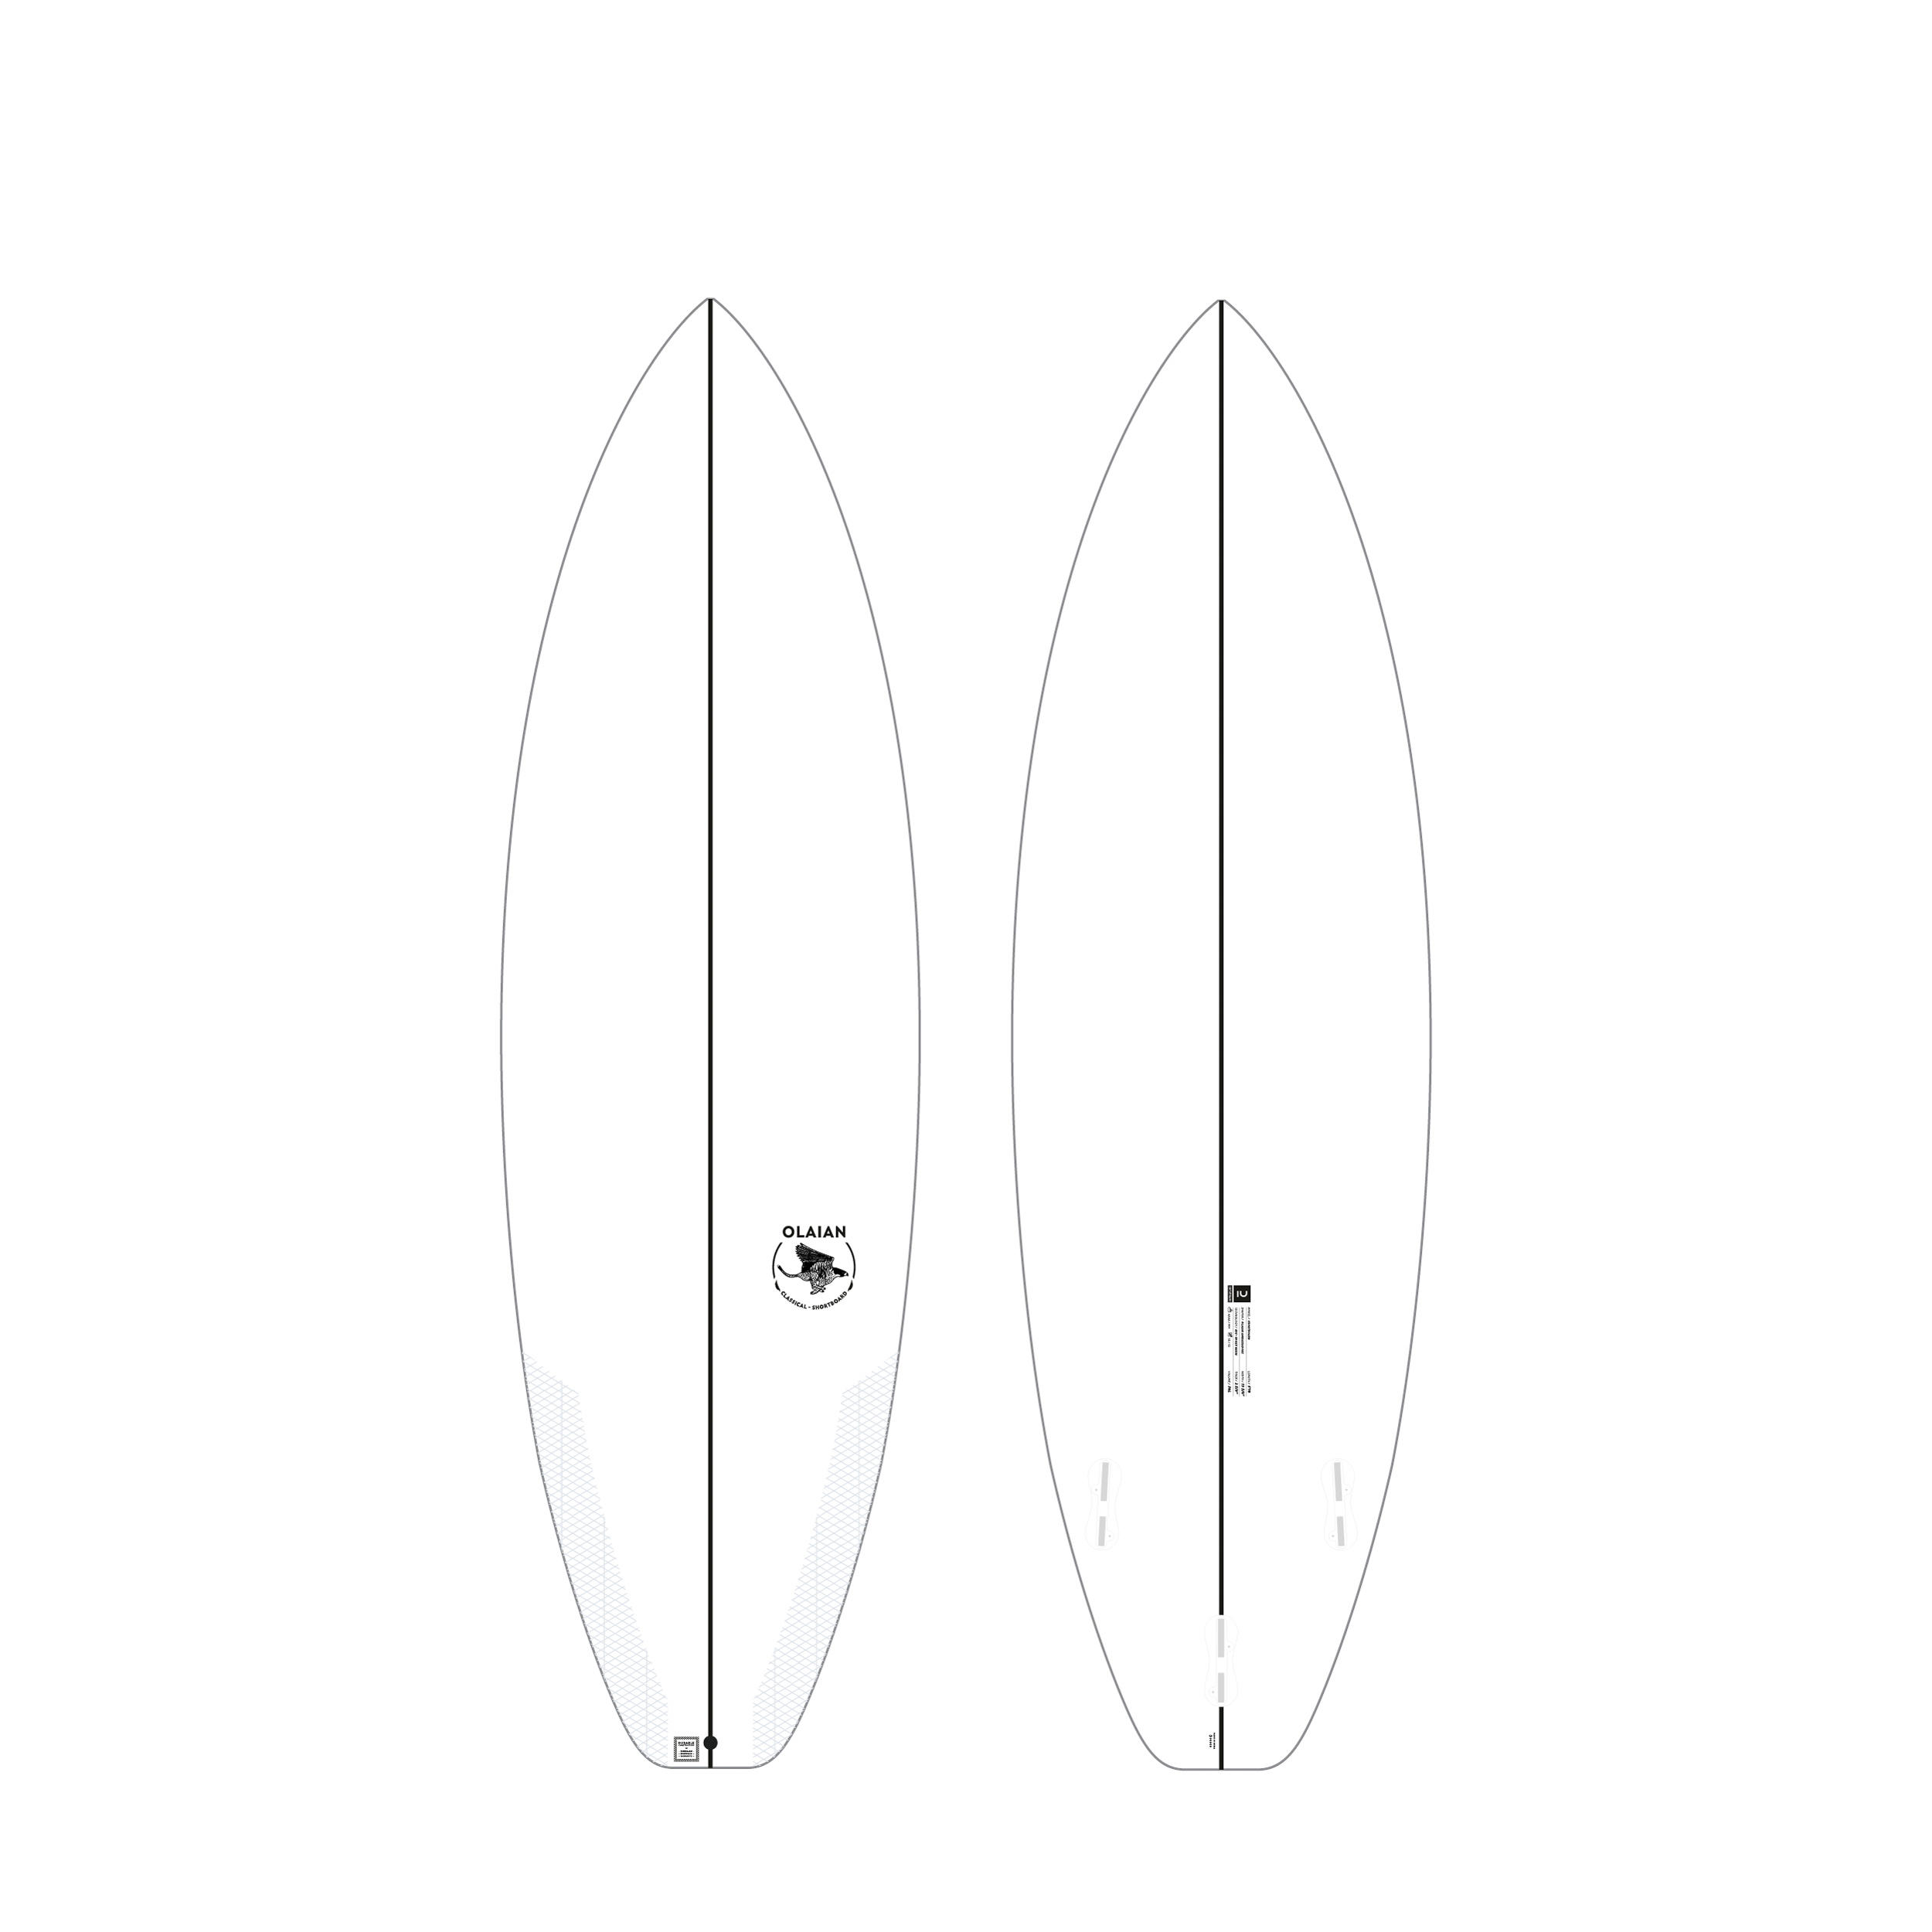 SHORTBOARD 900 5'10" 30 L. Supplied with 3 FCS2 fins 19/19